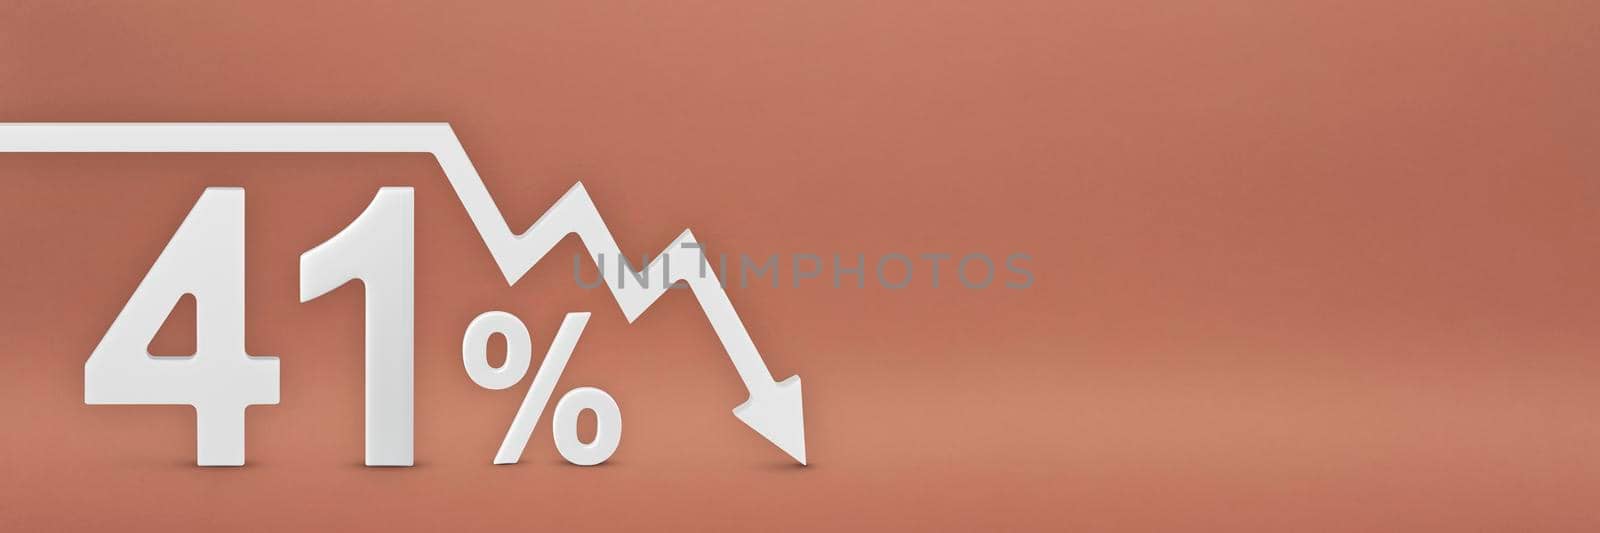 forty-one percent, the arrow on the graph is pointing down. Stock market crash, bear market, inflation.Economic collapse, collapse of stocks.3d banner,41 percent discount sign on a red background